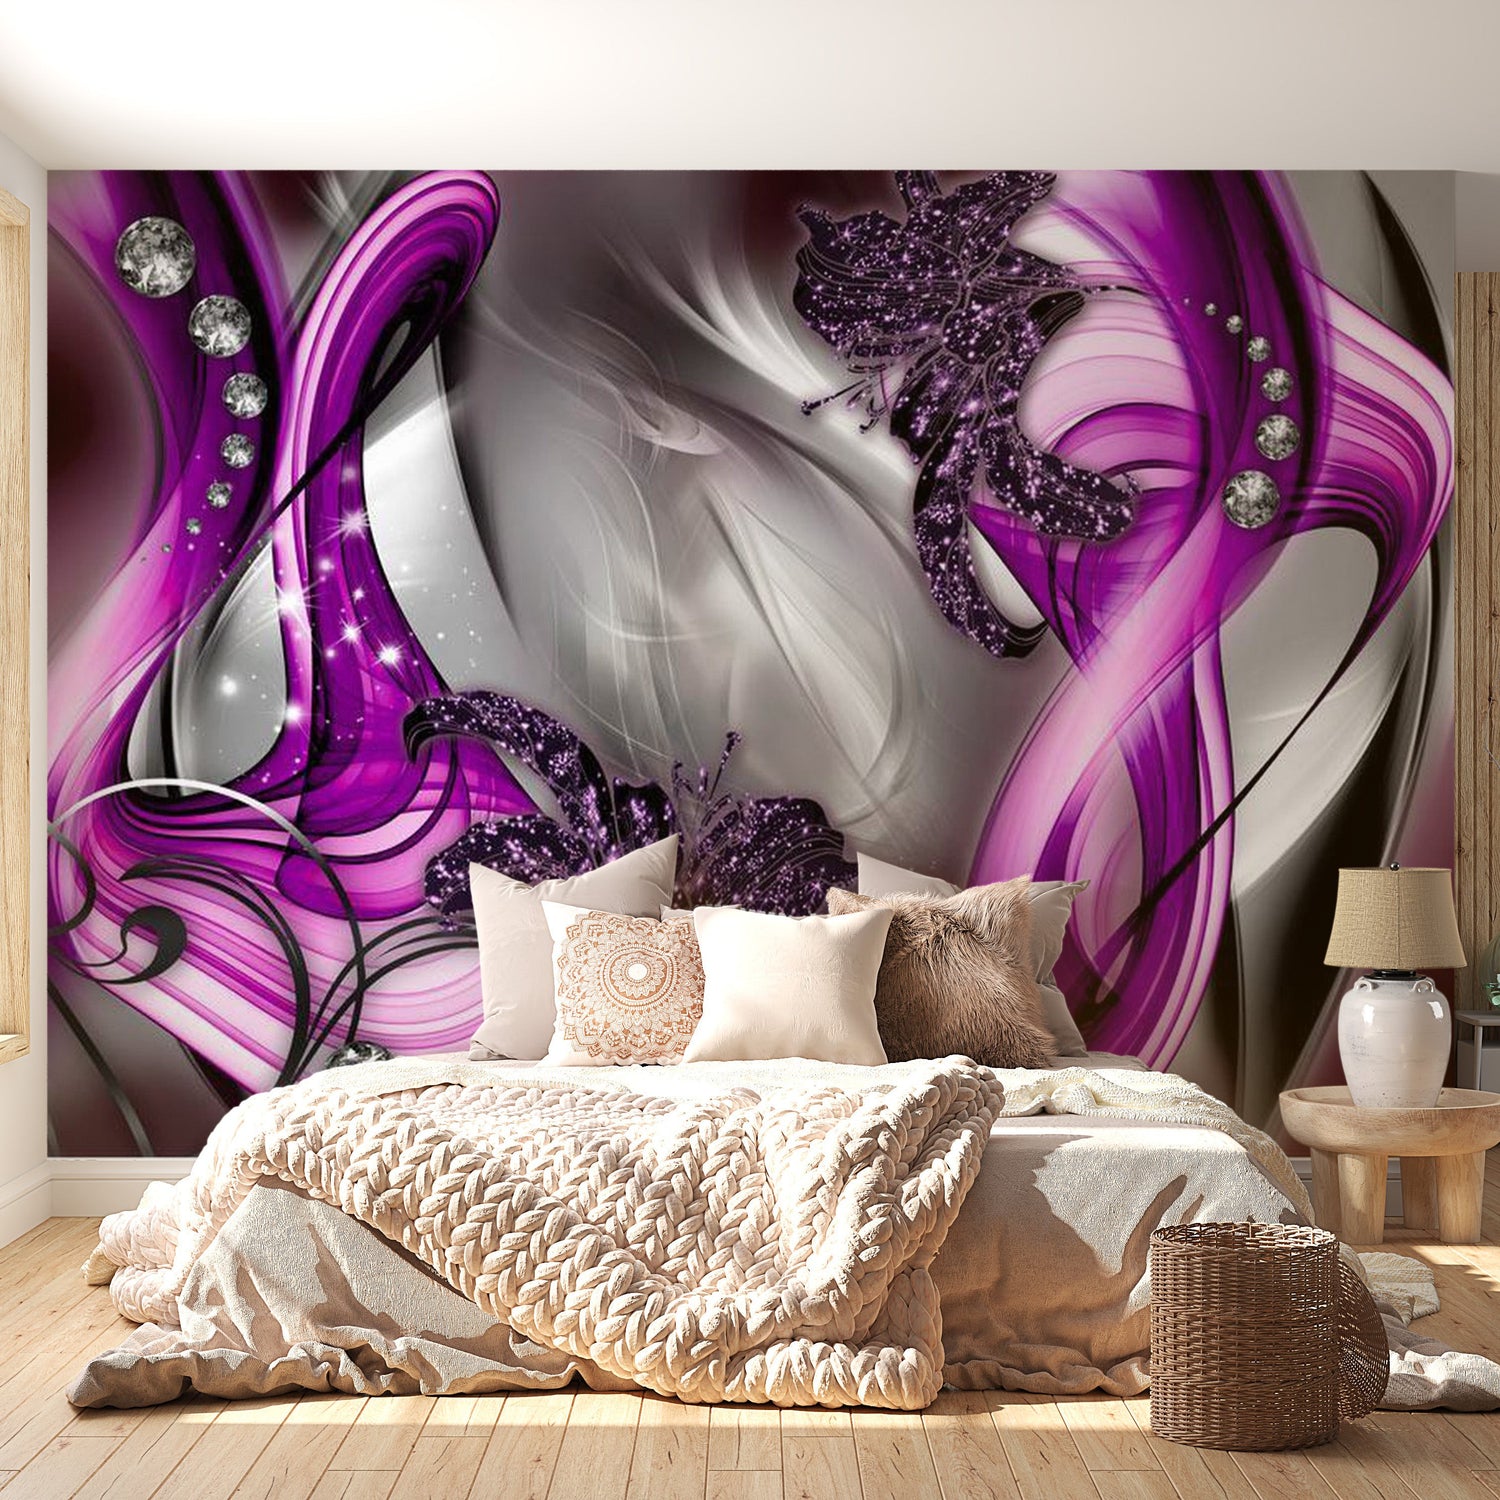 Peel & Stick Glam Wall Mural - Sounds Of Senses - Removable Wall Decals